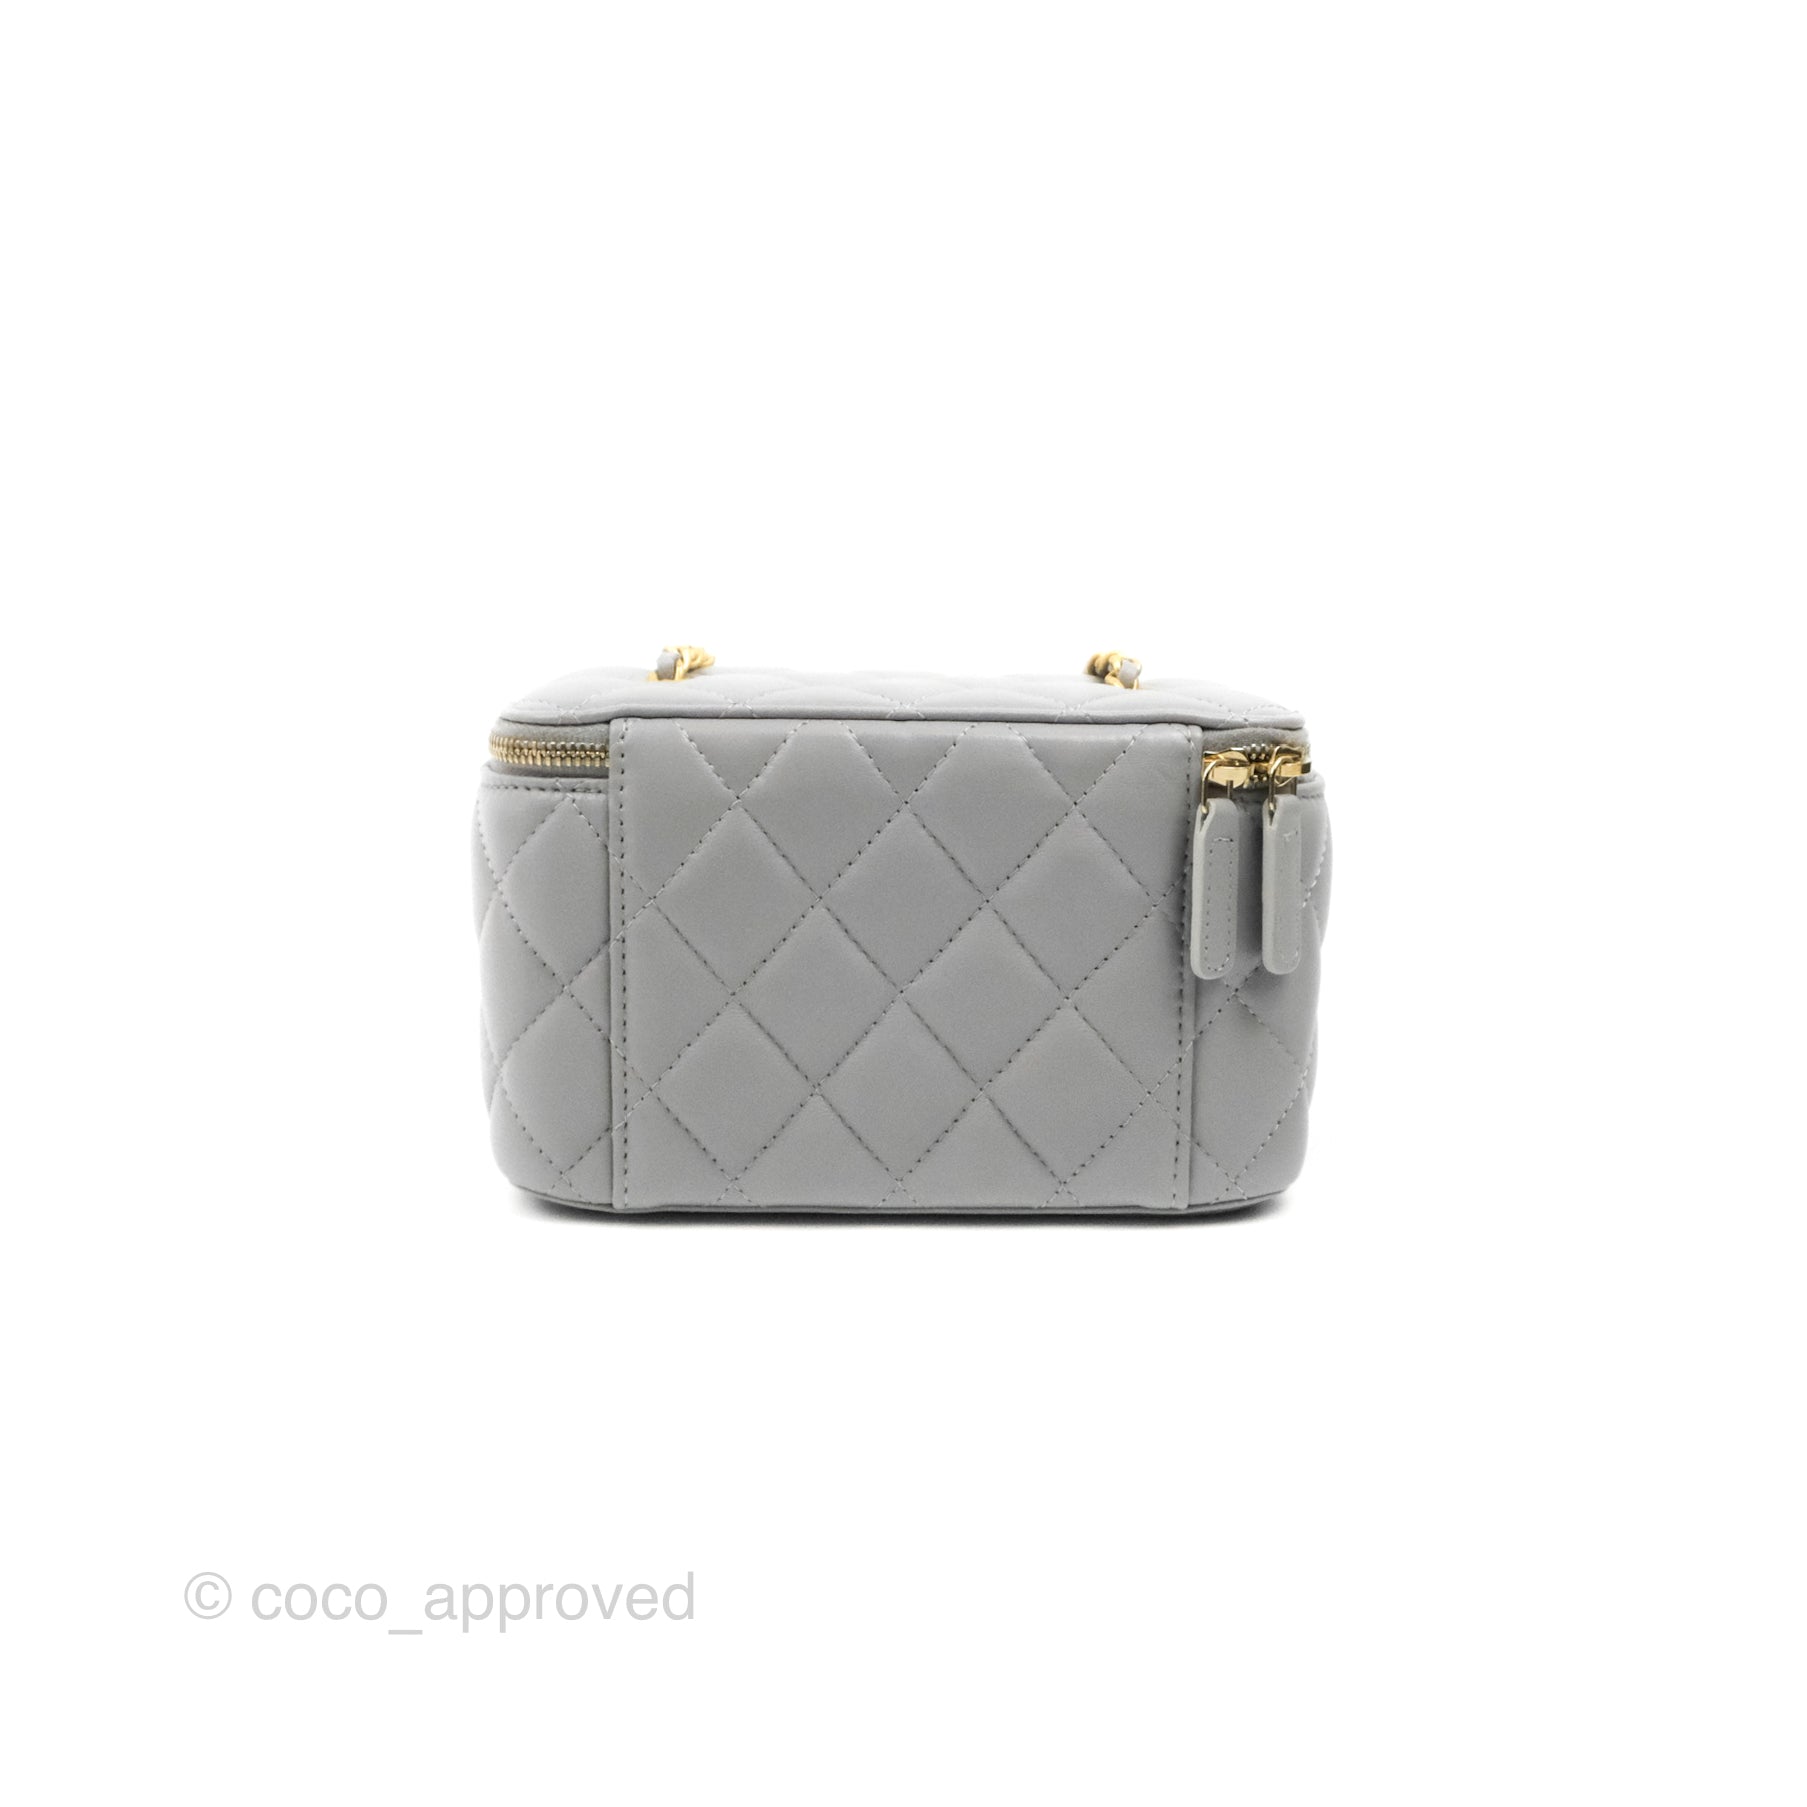 Chanel Lambskin Quilted Pearl Crush Small Vanity Case With Chain Black 